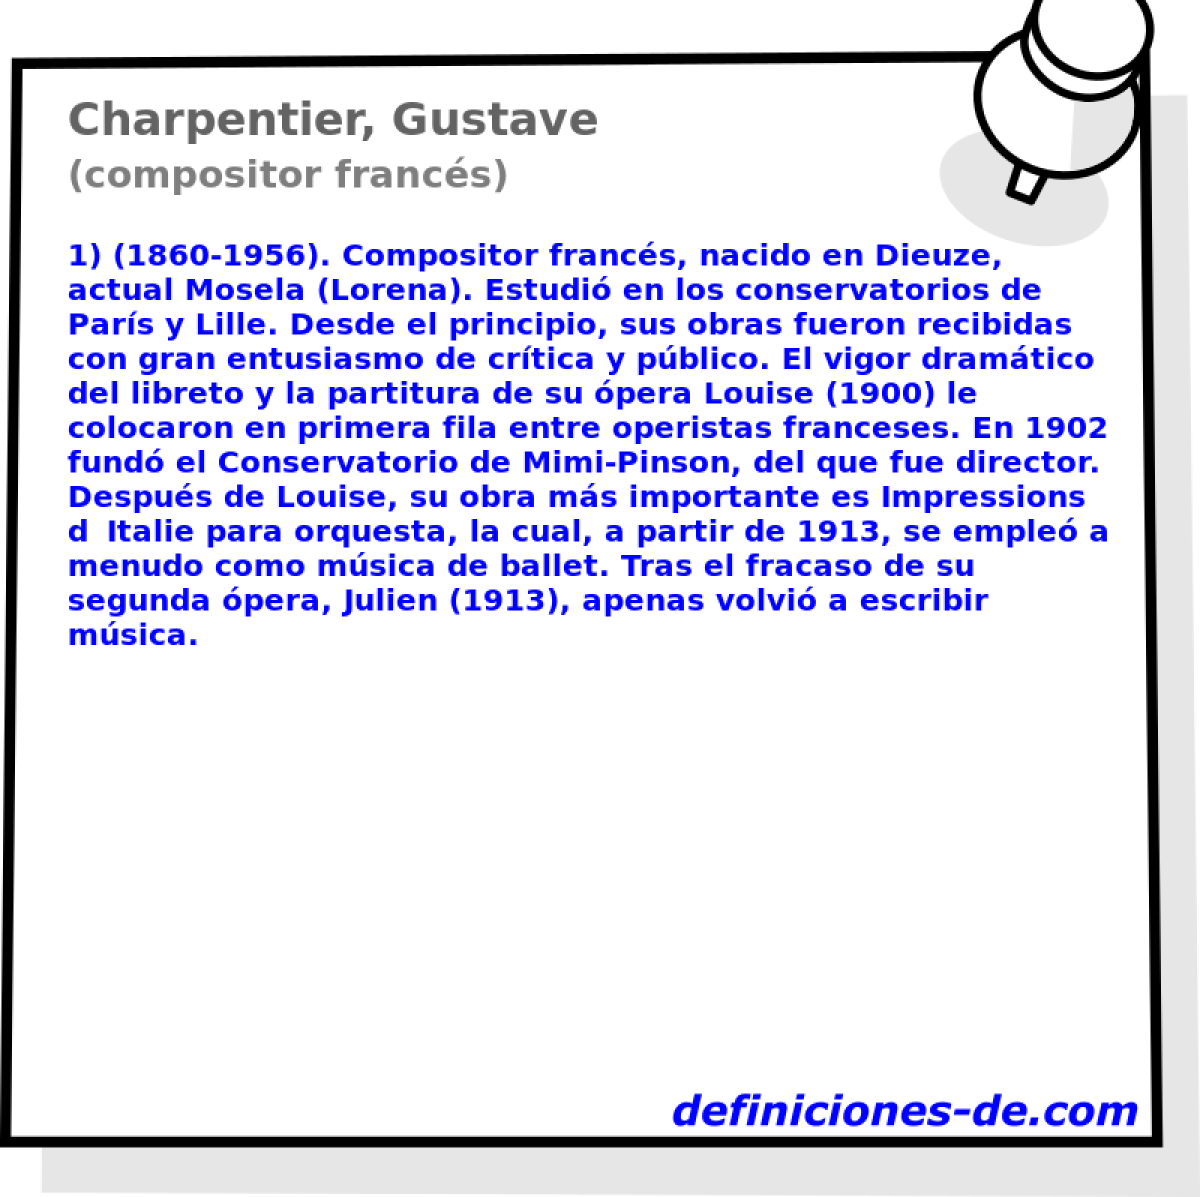 Charpentier, Gustave (compositor francs)